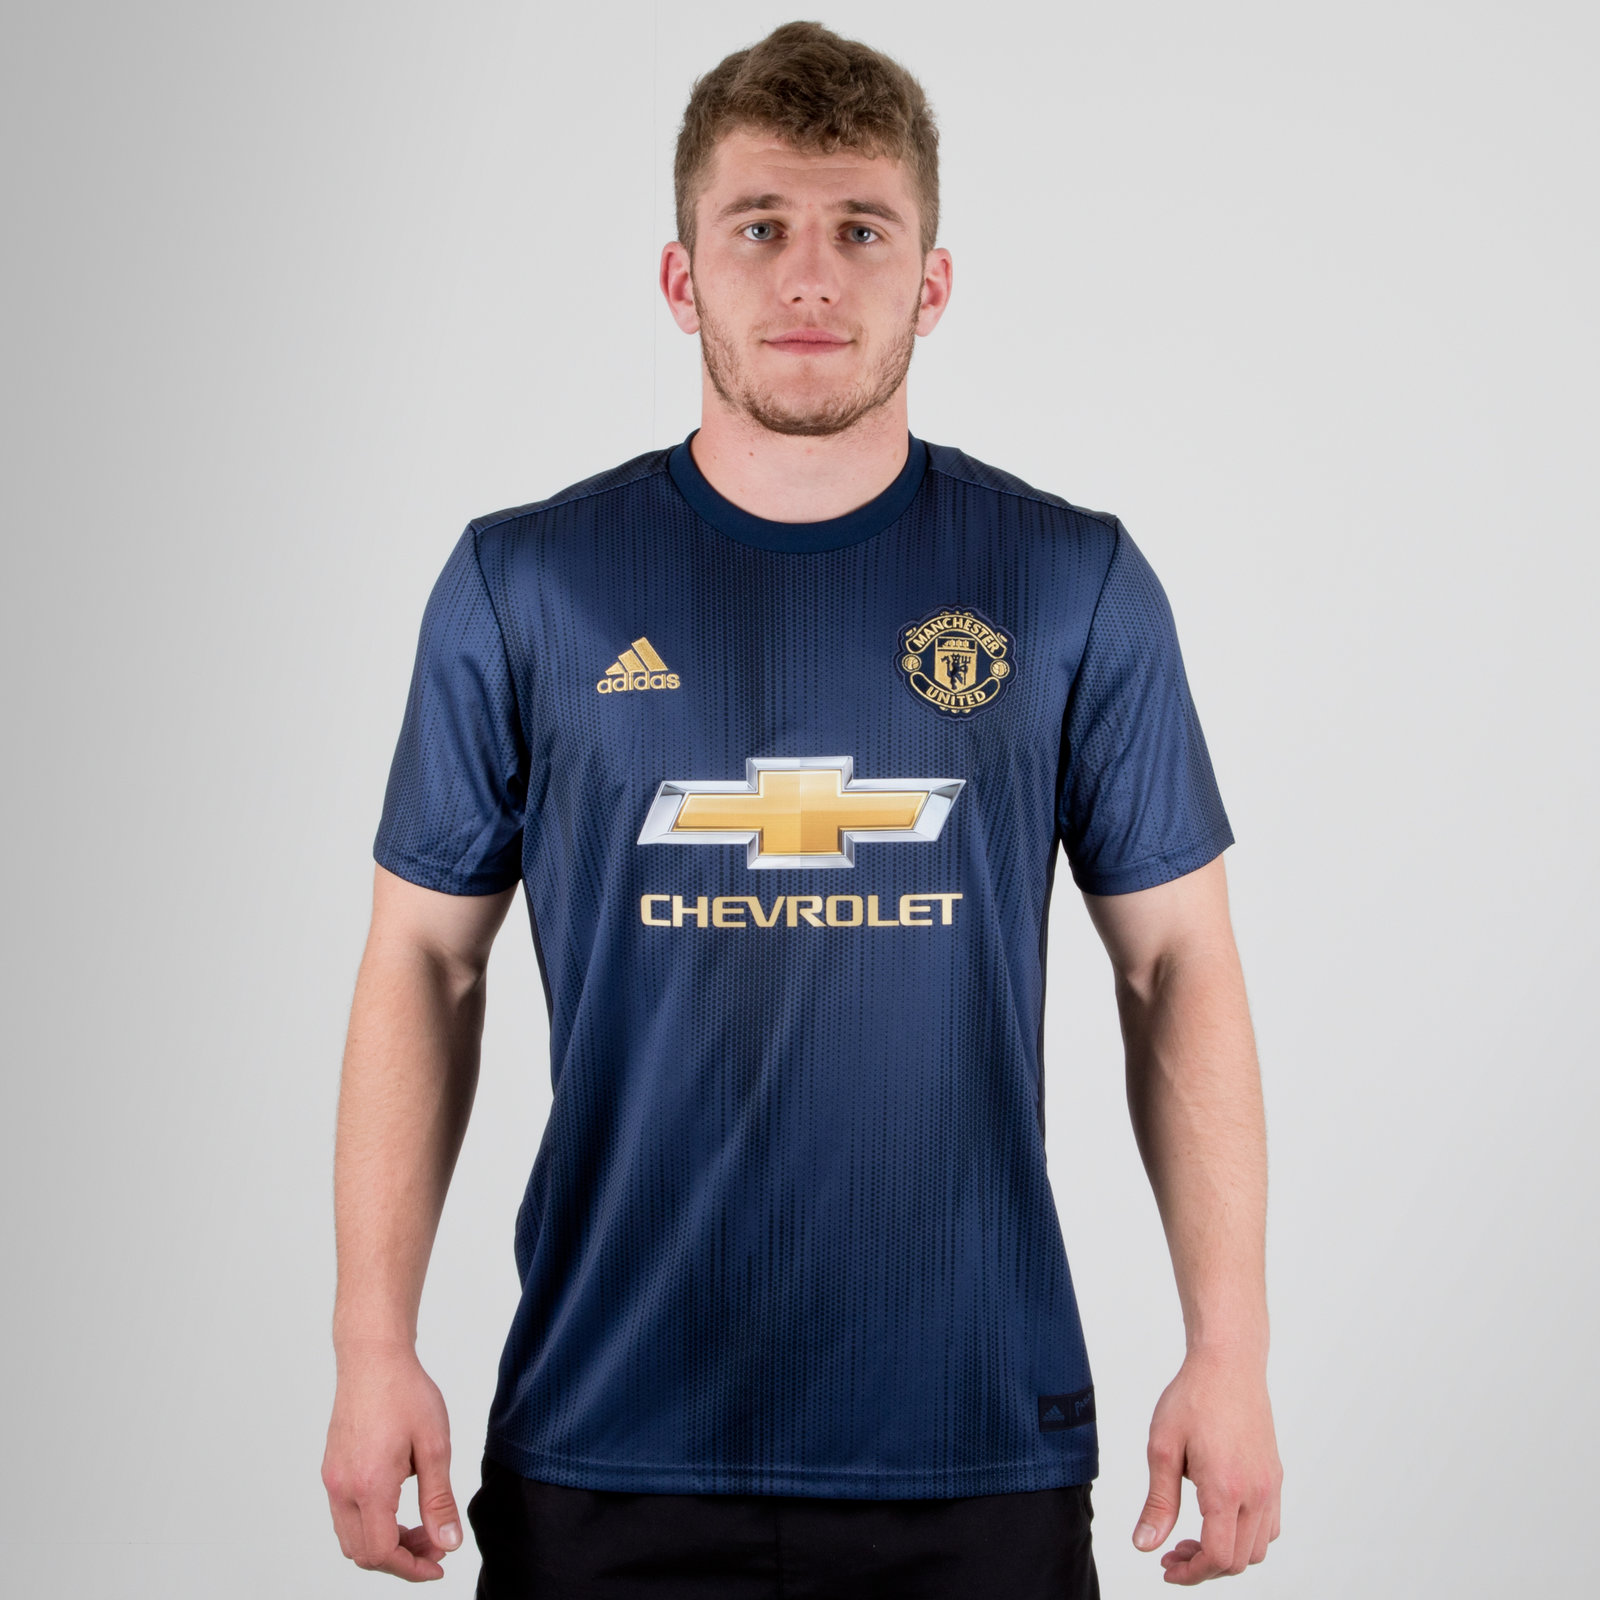 Adidas Hommes Manchester United Training Maillot 18//19